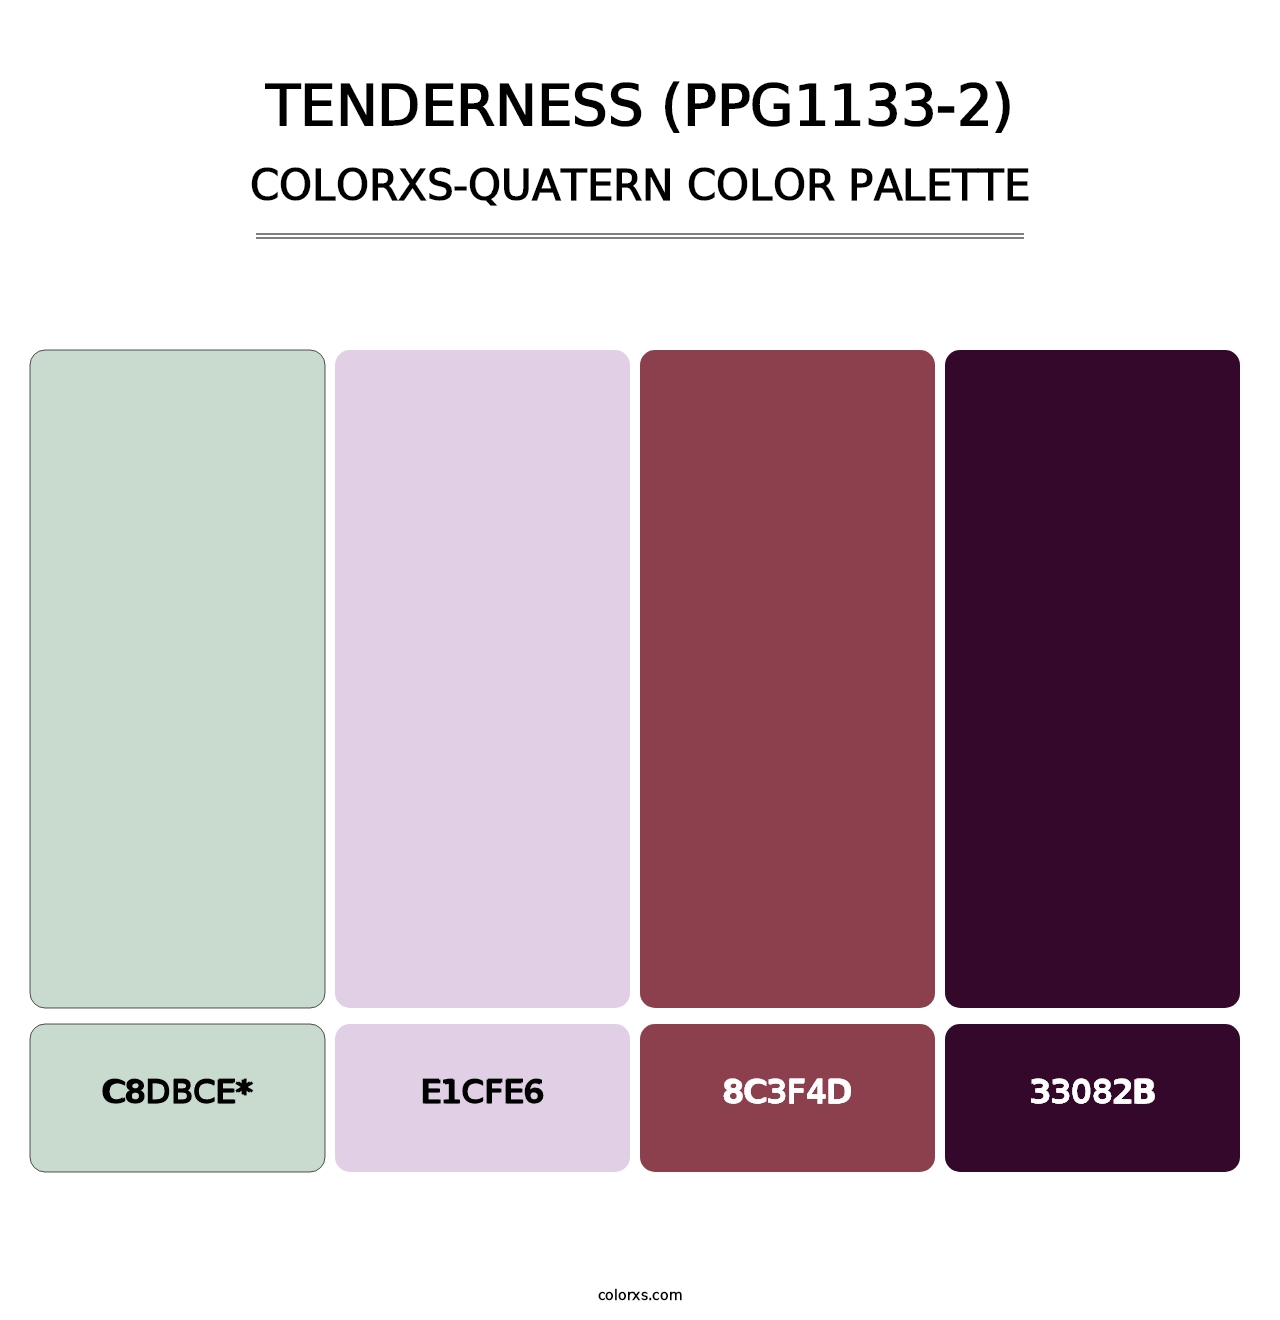 Tenderness (PPG1133-2) - Colorxs Quatern Palette